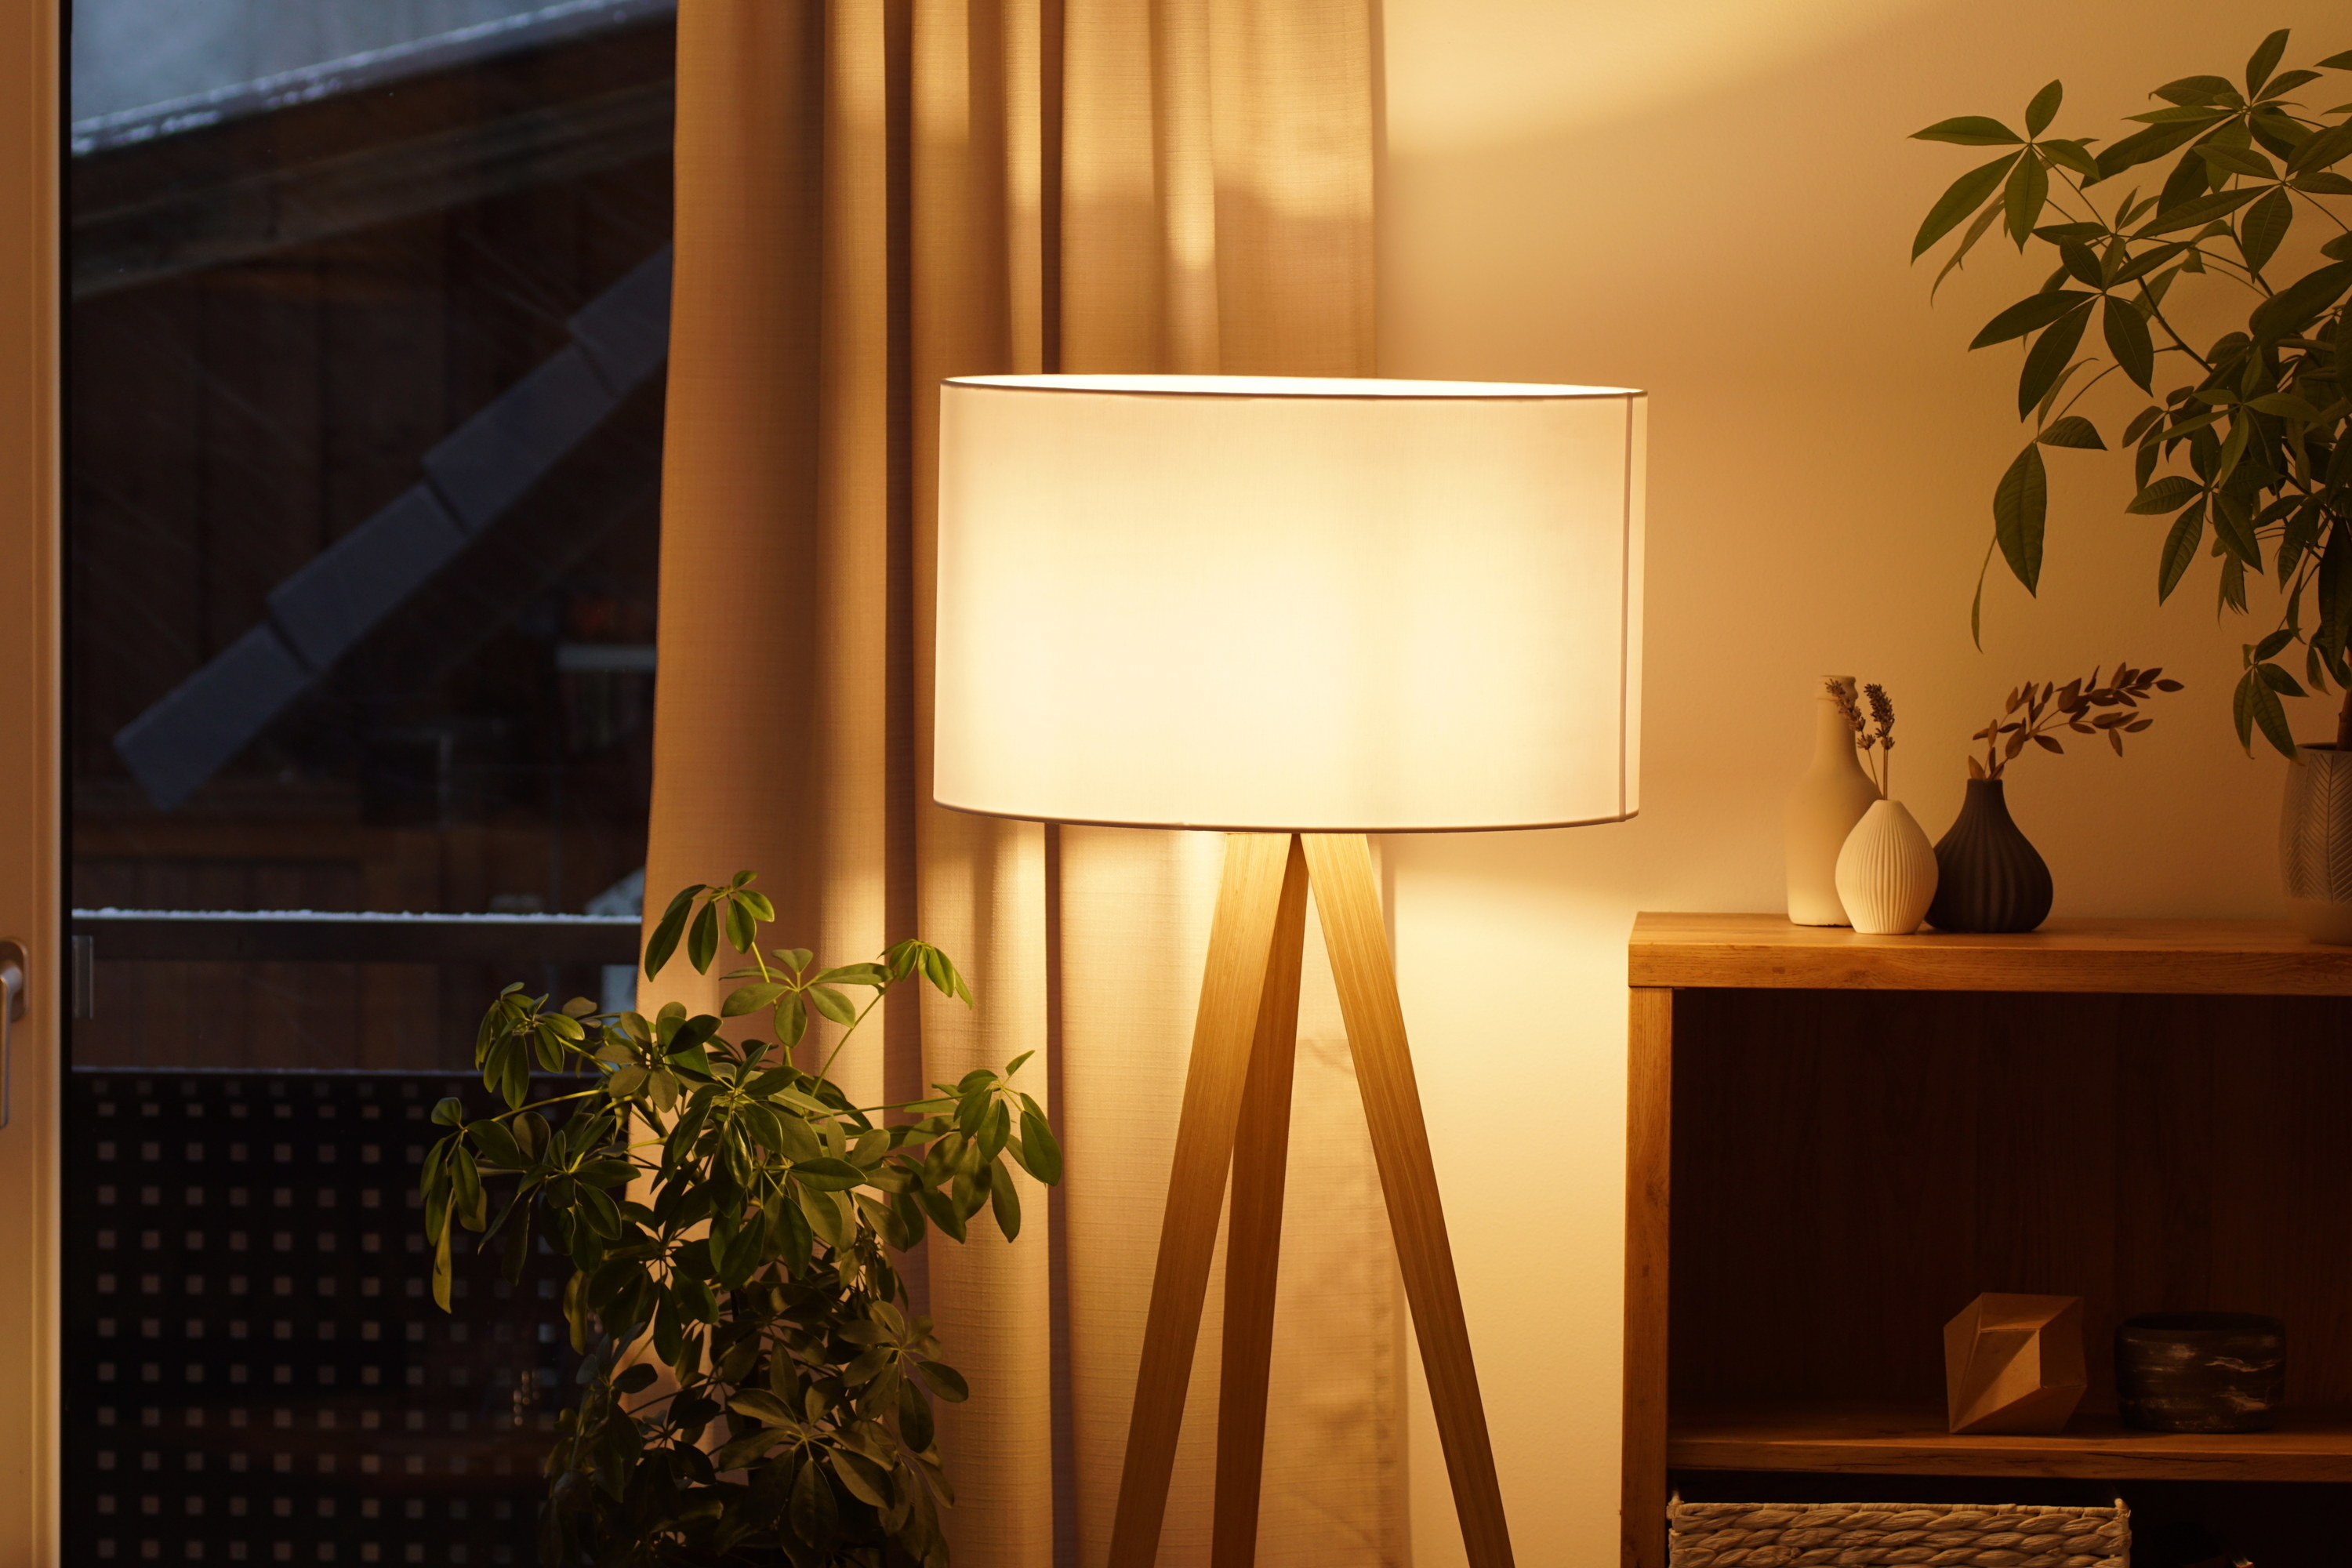 A modern lamp in a house